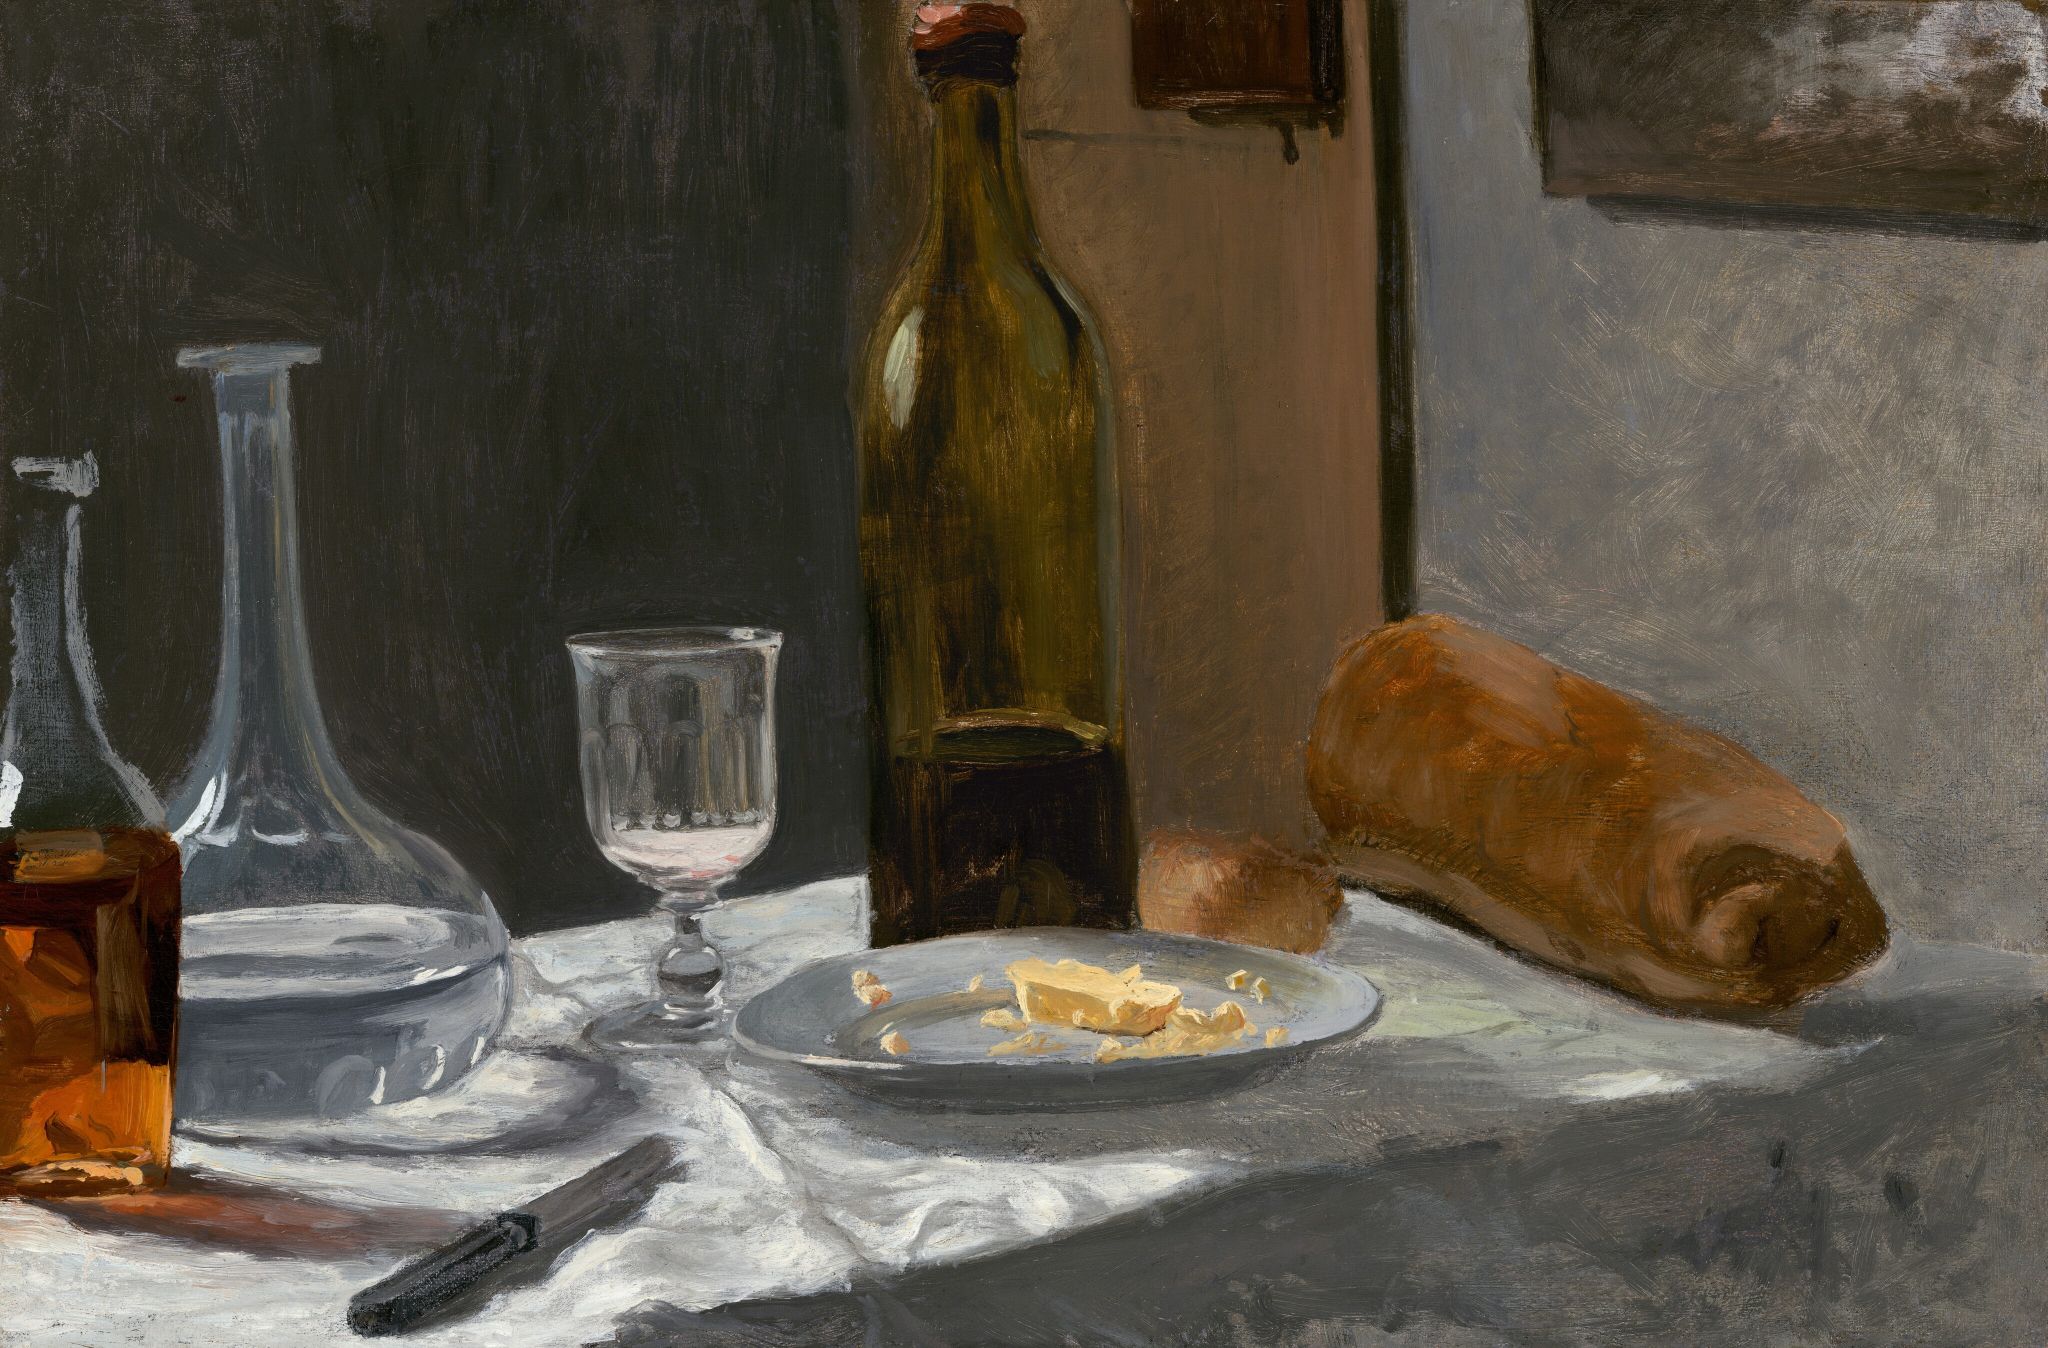 still_life_with_bottle_carafe_bread_and_wine.jpg